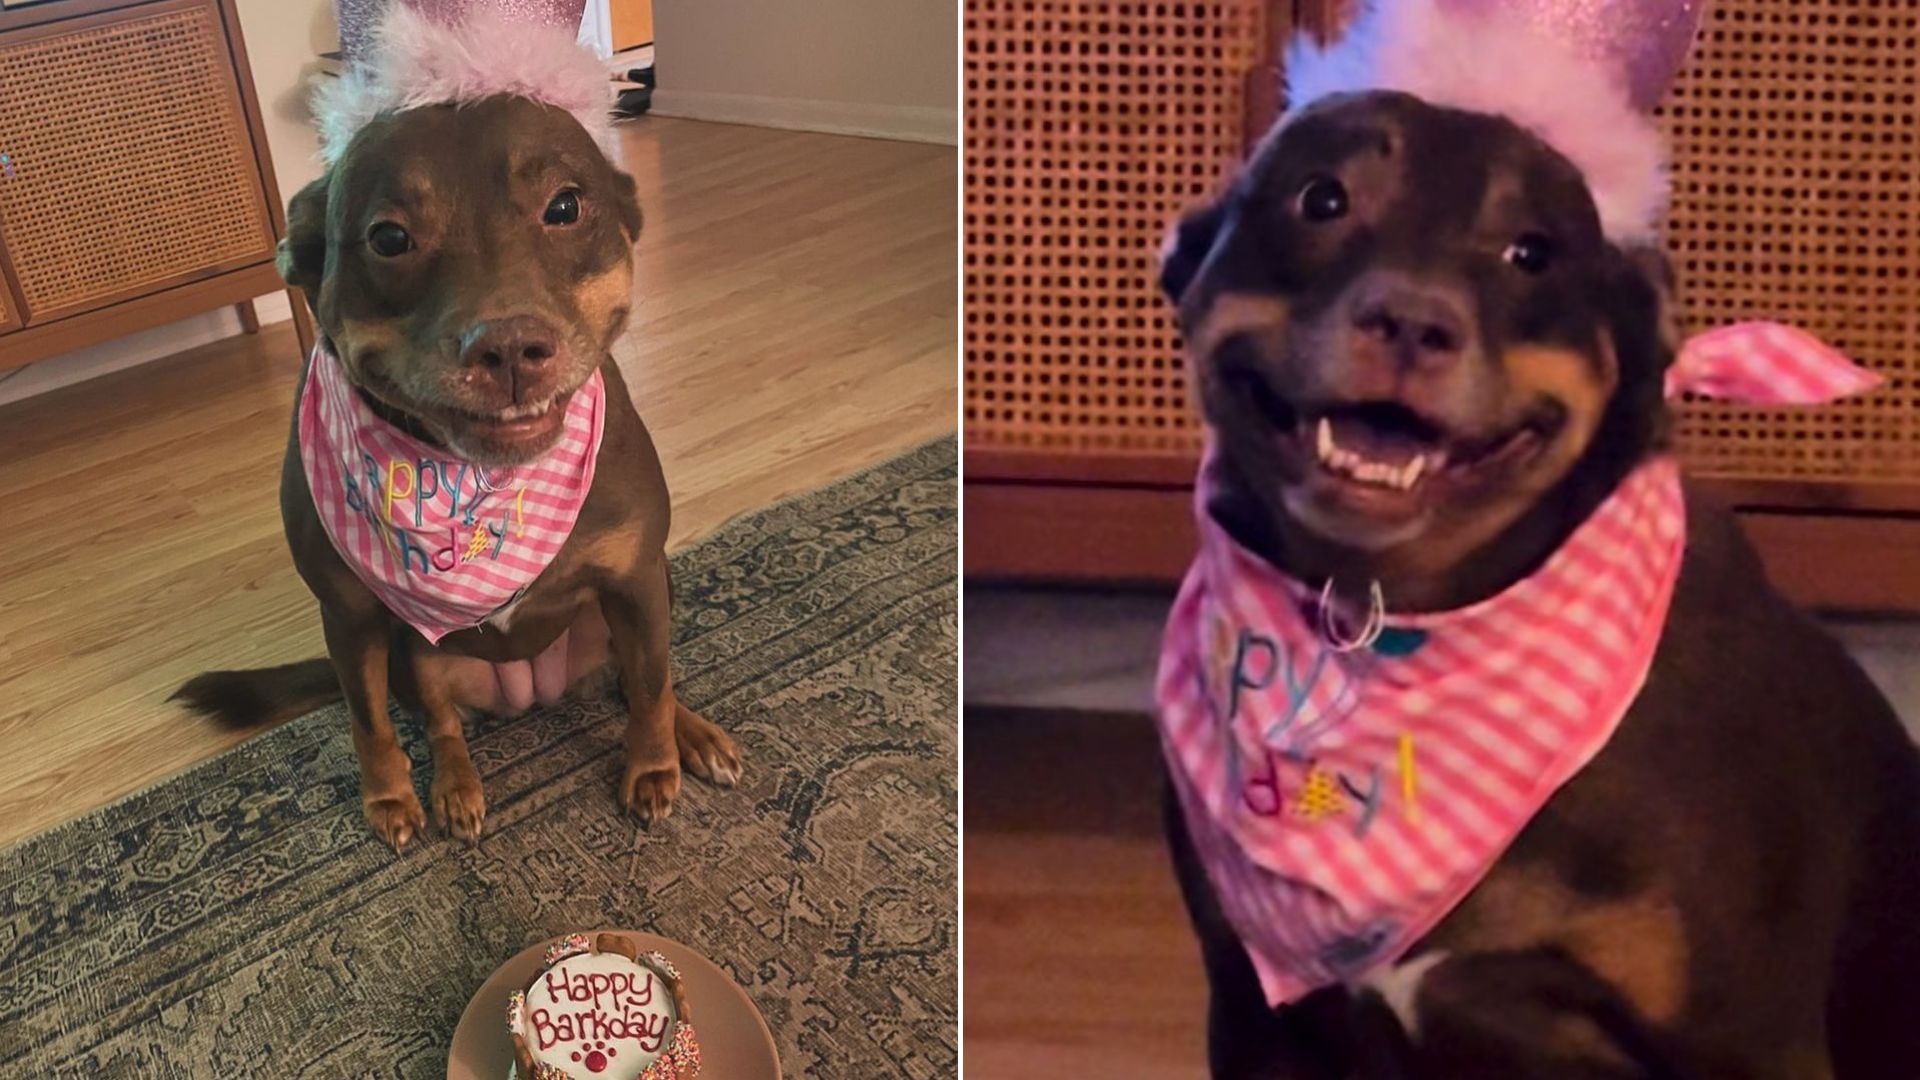 Owners Noticed Their Pup Is Always Excited For Big Events So They Threw Her A Huge Party